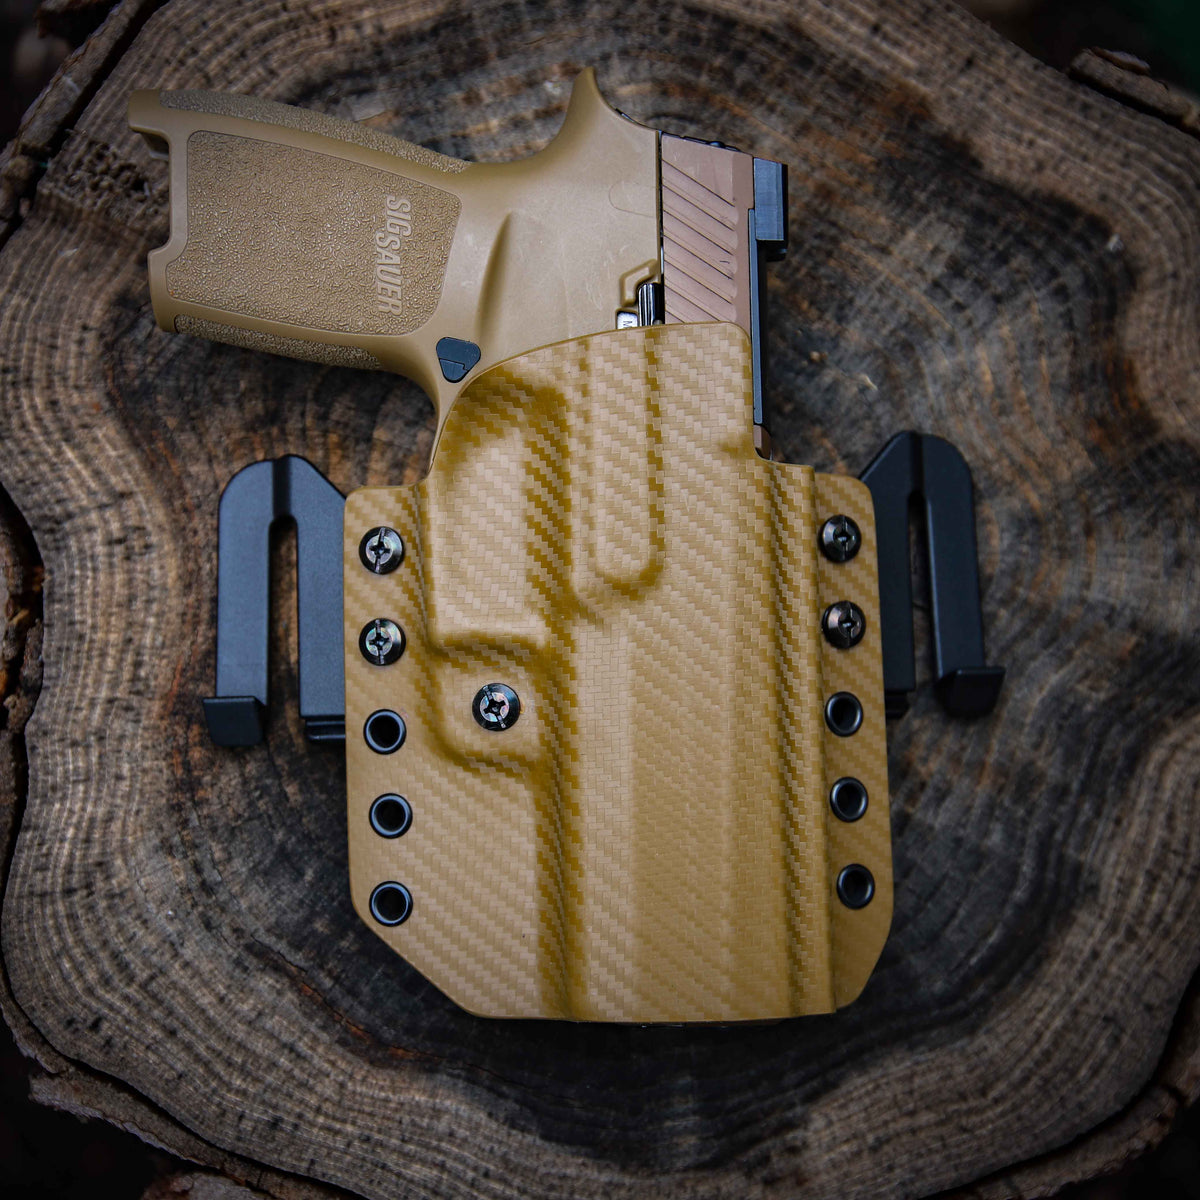 The Curve OWB - Gun Holsters, Magazine Carriers, and Tactical Gear